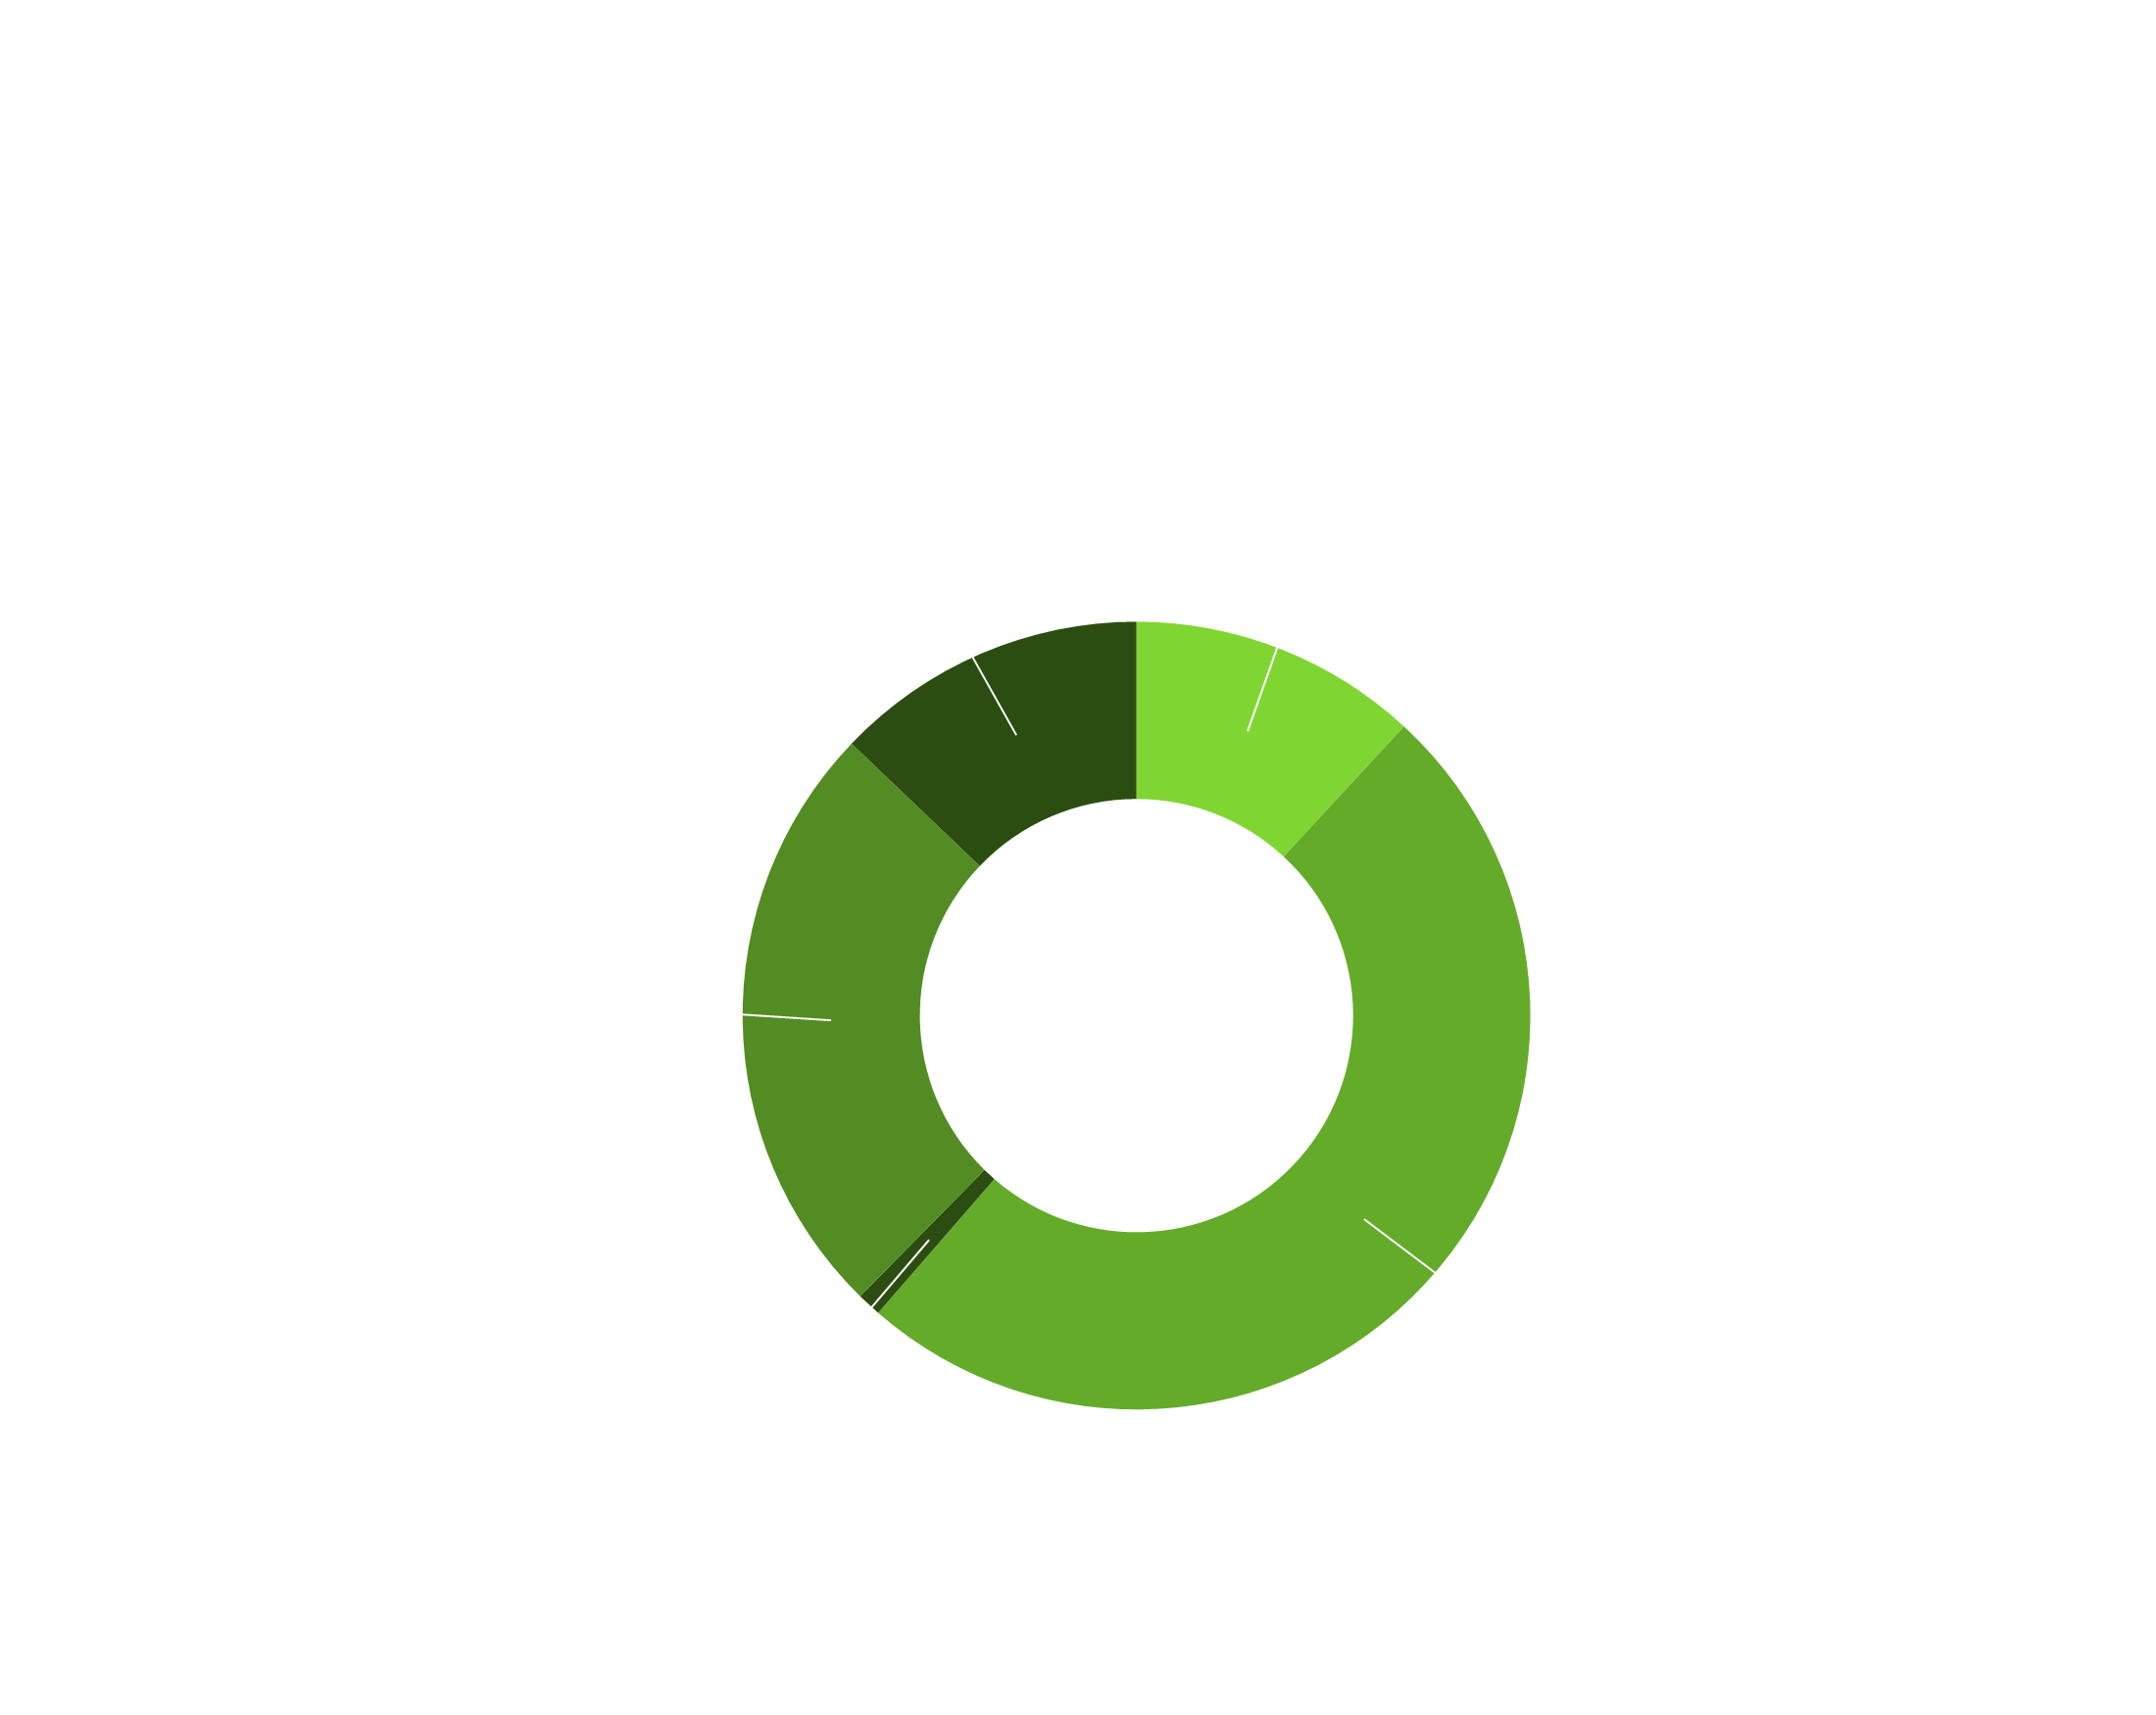 Aeronautics Expenditures Fiscal Year 2023 chart shows Airport and Construction are 50%, Aid to Local Airports is 25%, Airplane Operations is 13%, Administration is 12%, and Civil Air Patrol is 1%